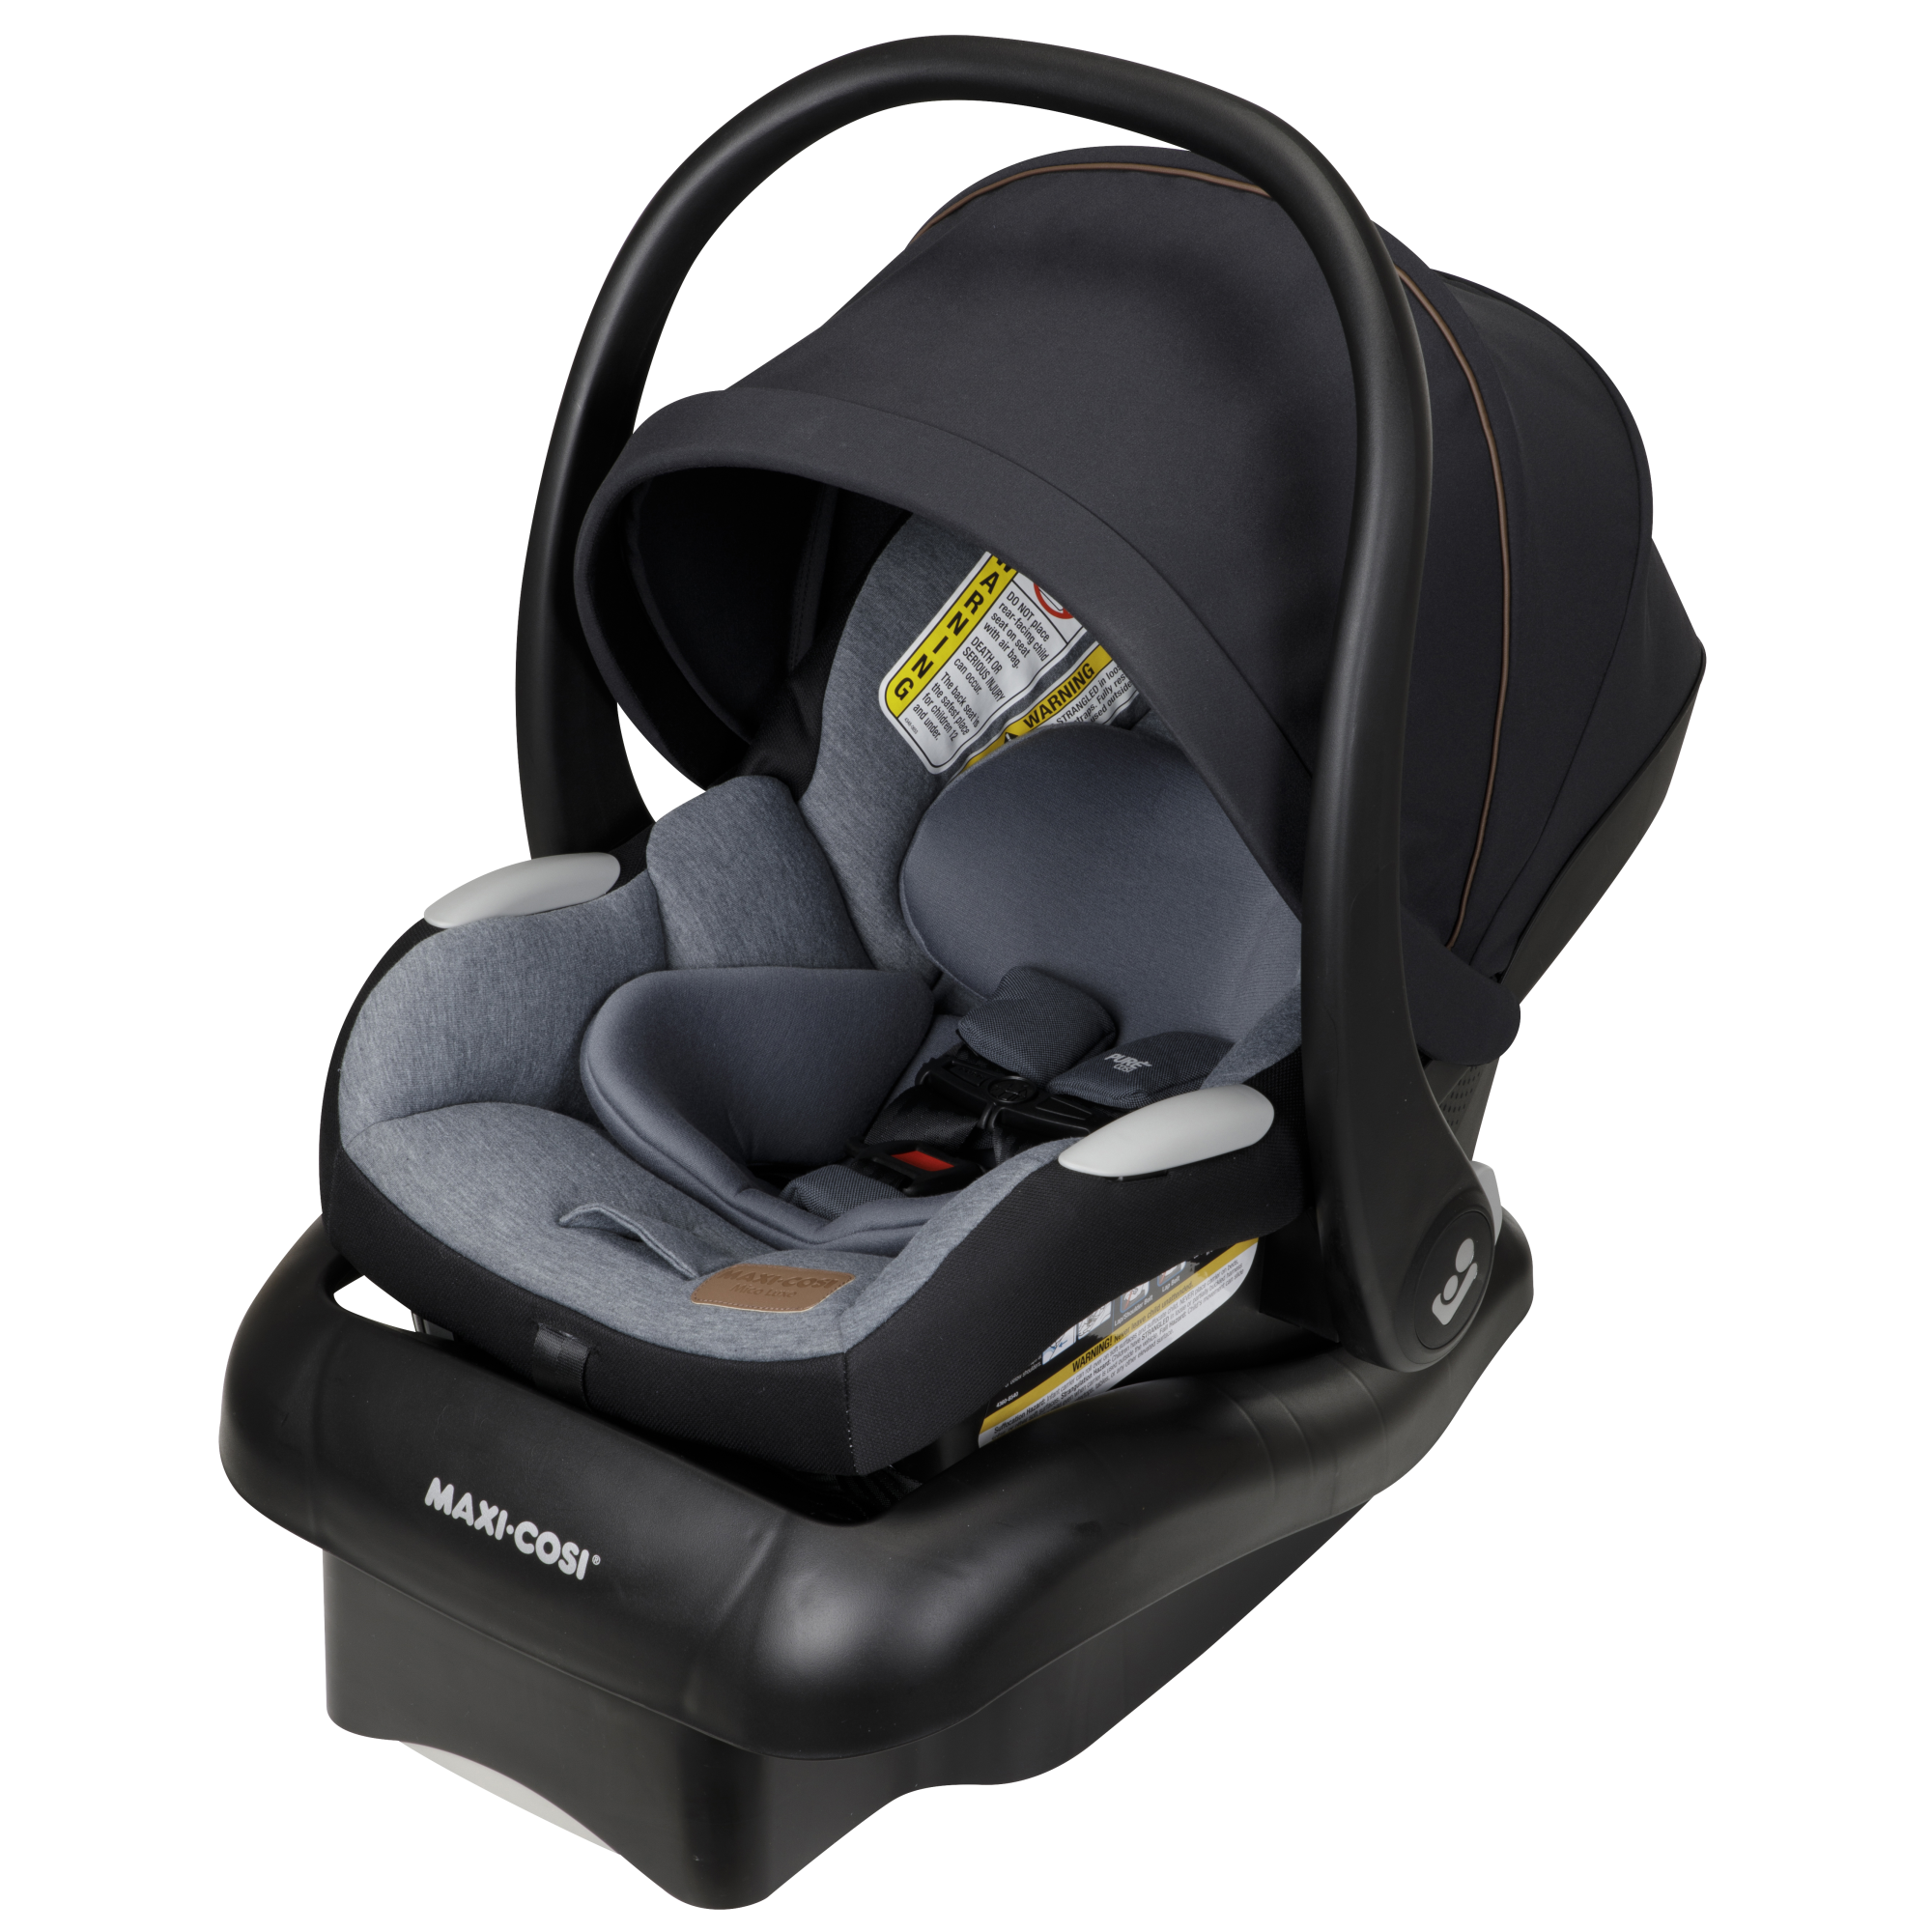 Mico™ Luxe Infant Car Seat - infographic: vegan leather grip; contoured, ergonomic handle; side impact protection; large, visible belt guides; removable infant inserts; PureCosi fabrics; ClimaFlow technology